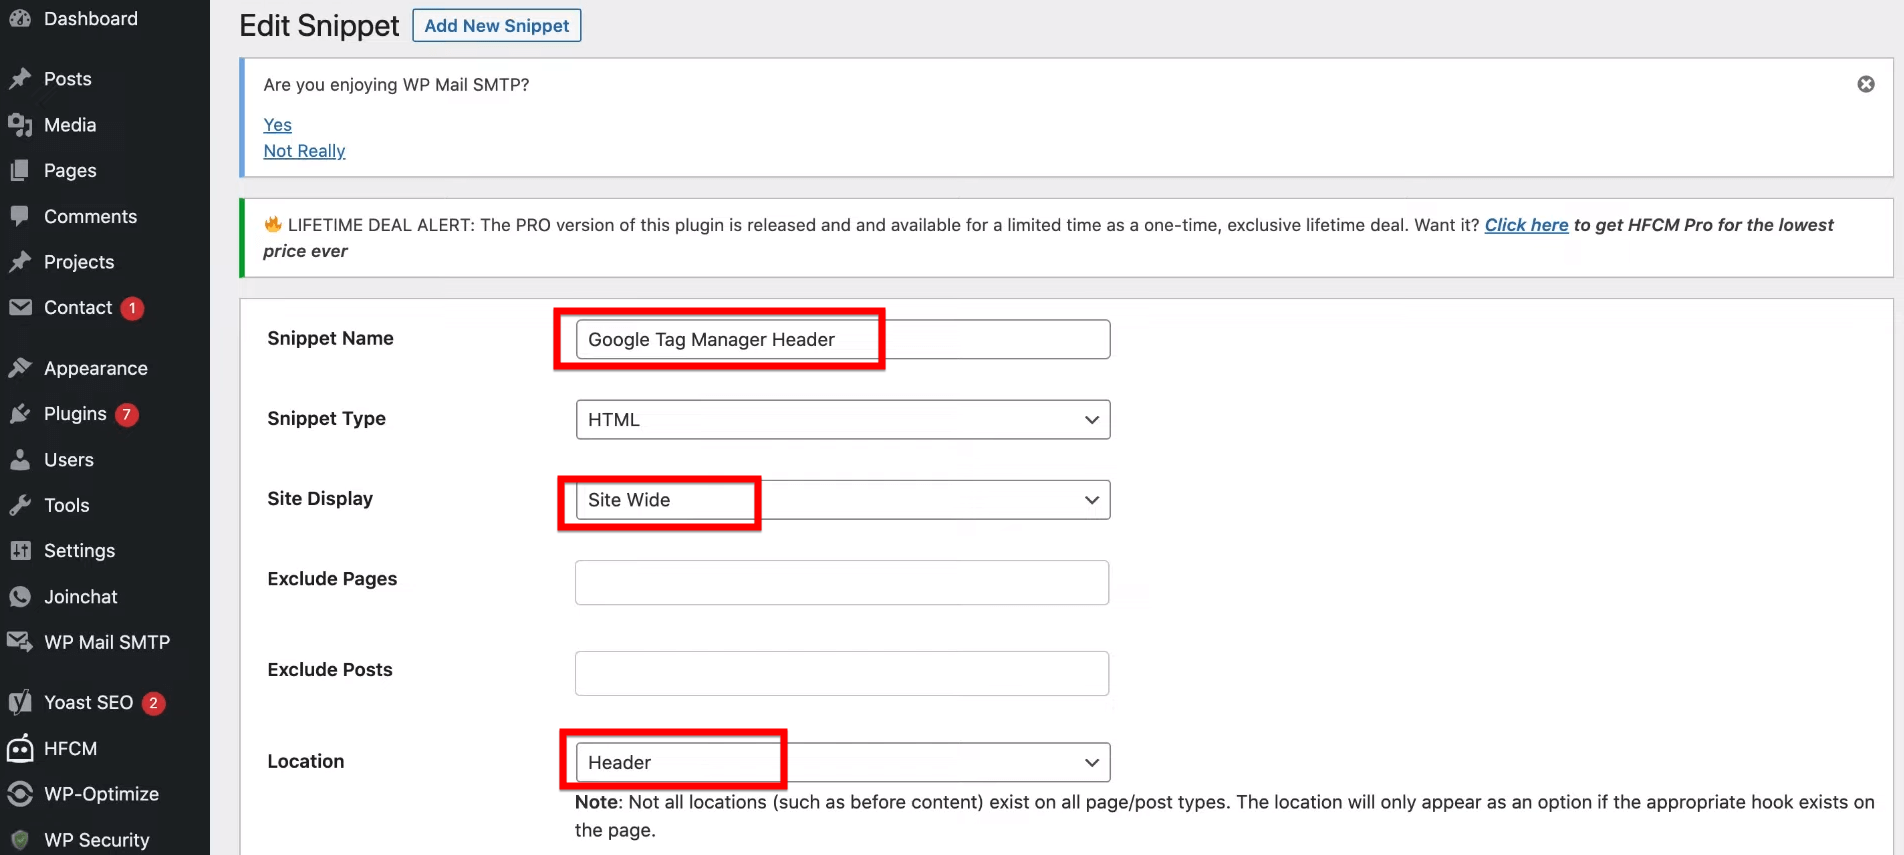 Filling Out The Required Information